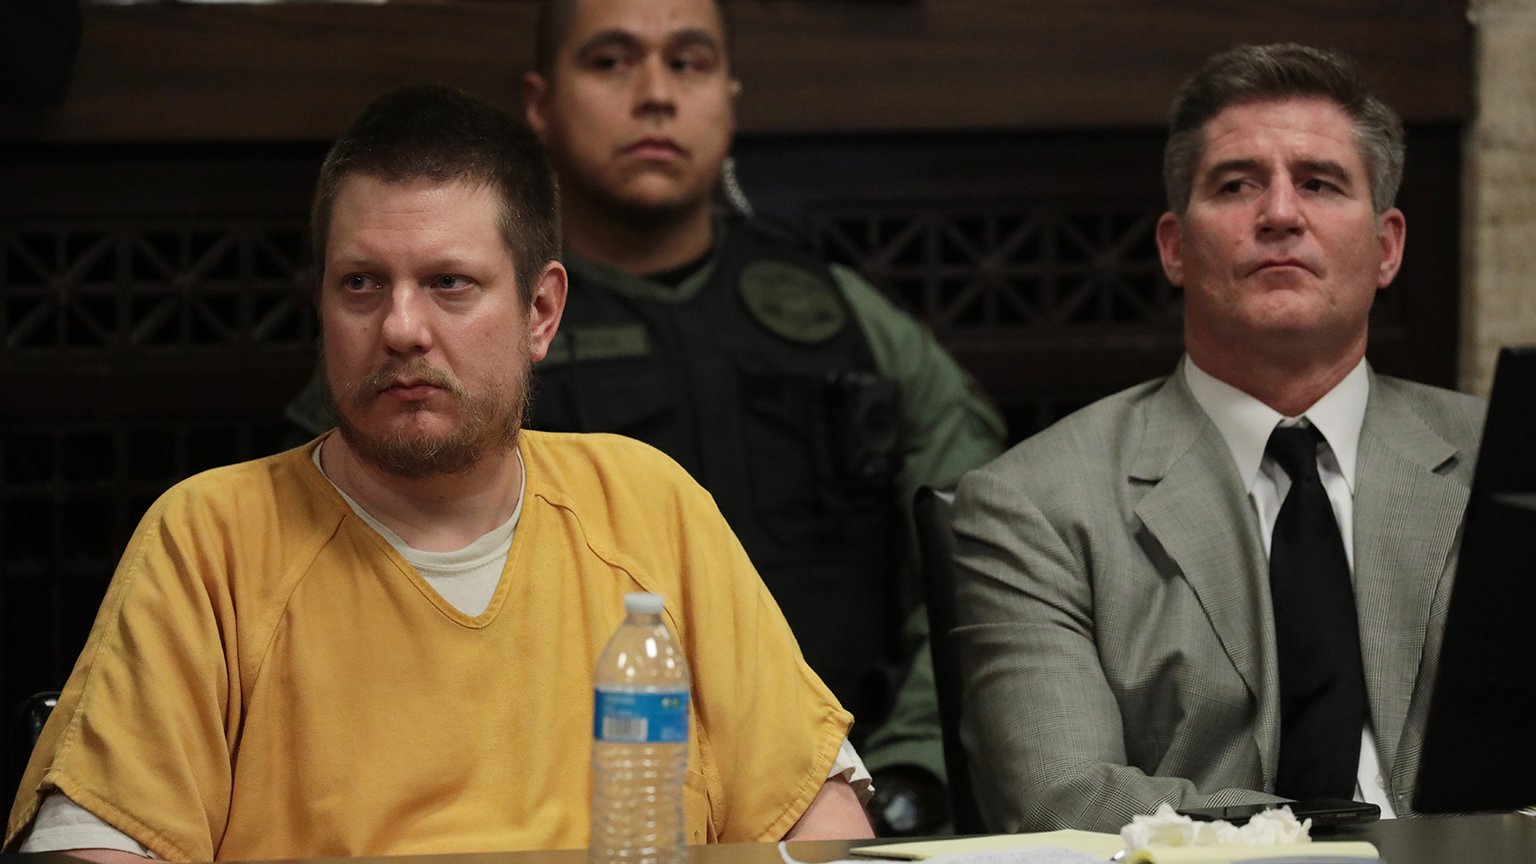 Former Chicago police Officer Jason Van Dyke and his attorney Daniel Herbert, right, listen as the judge describes how he’ll be sentenced on Friday, Jan. 18, 2019. (Antonio Perez / Chicago Tribune / Pool)